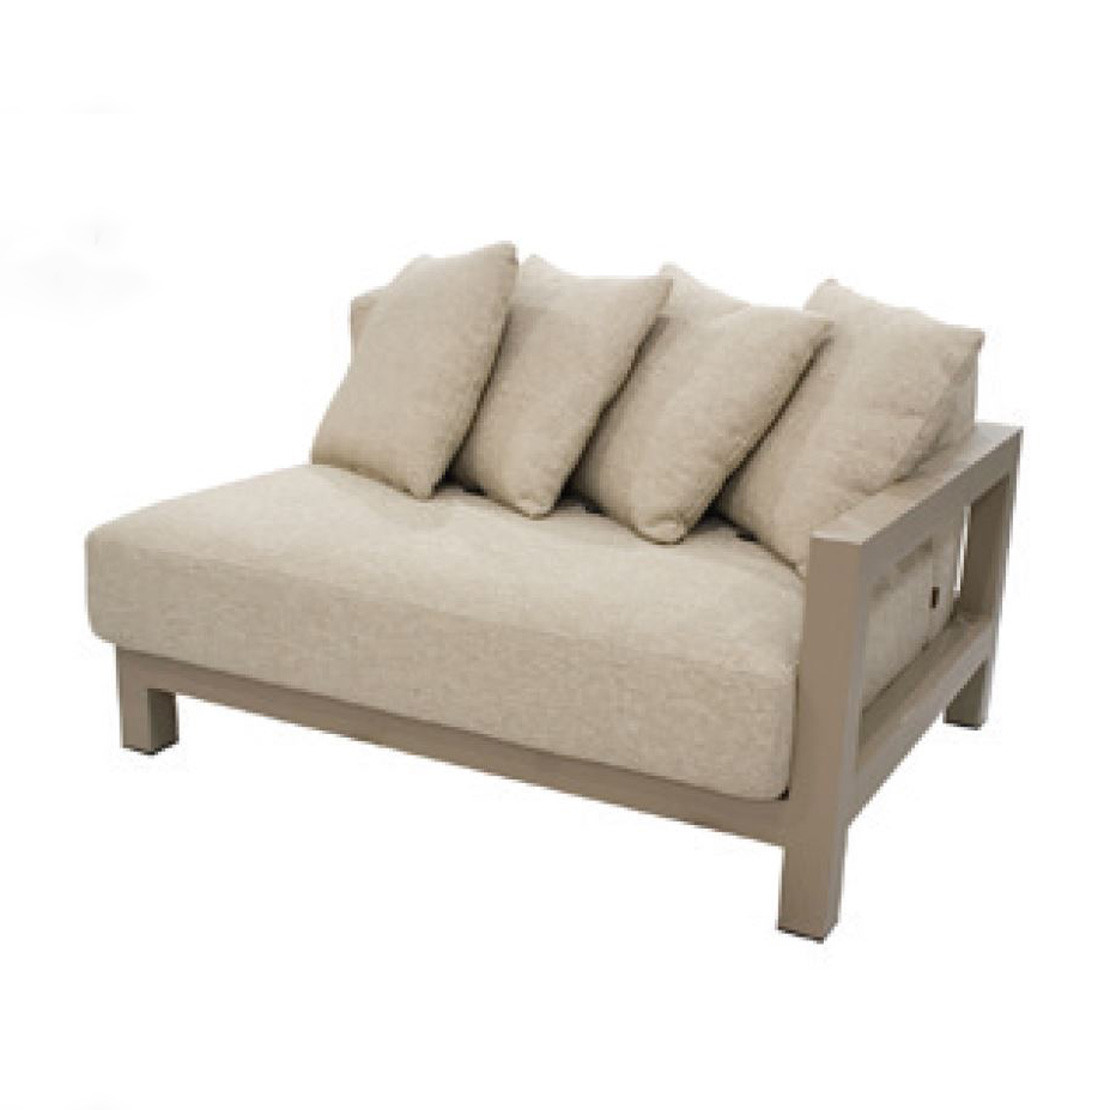 Raffinato living bench 1.5 seater left latte with 6 cushions